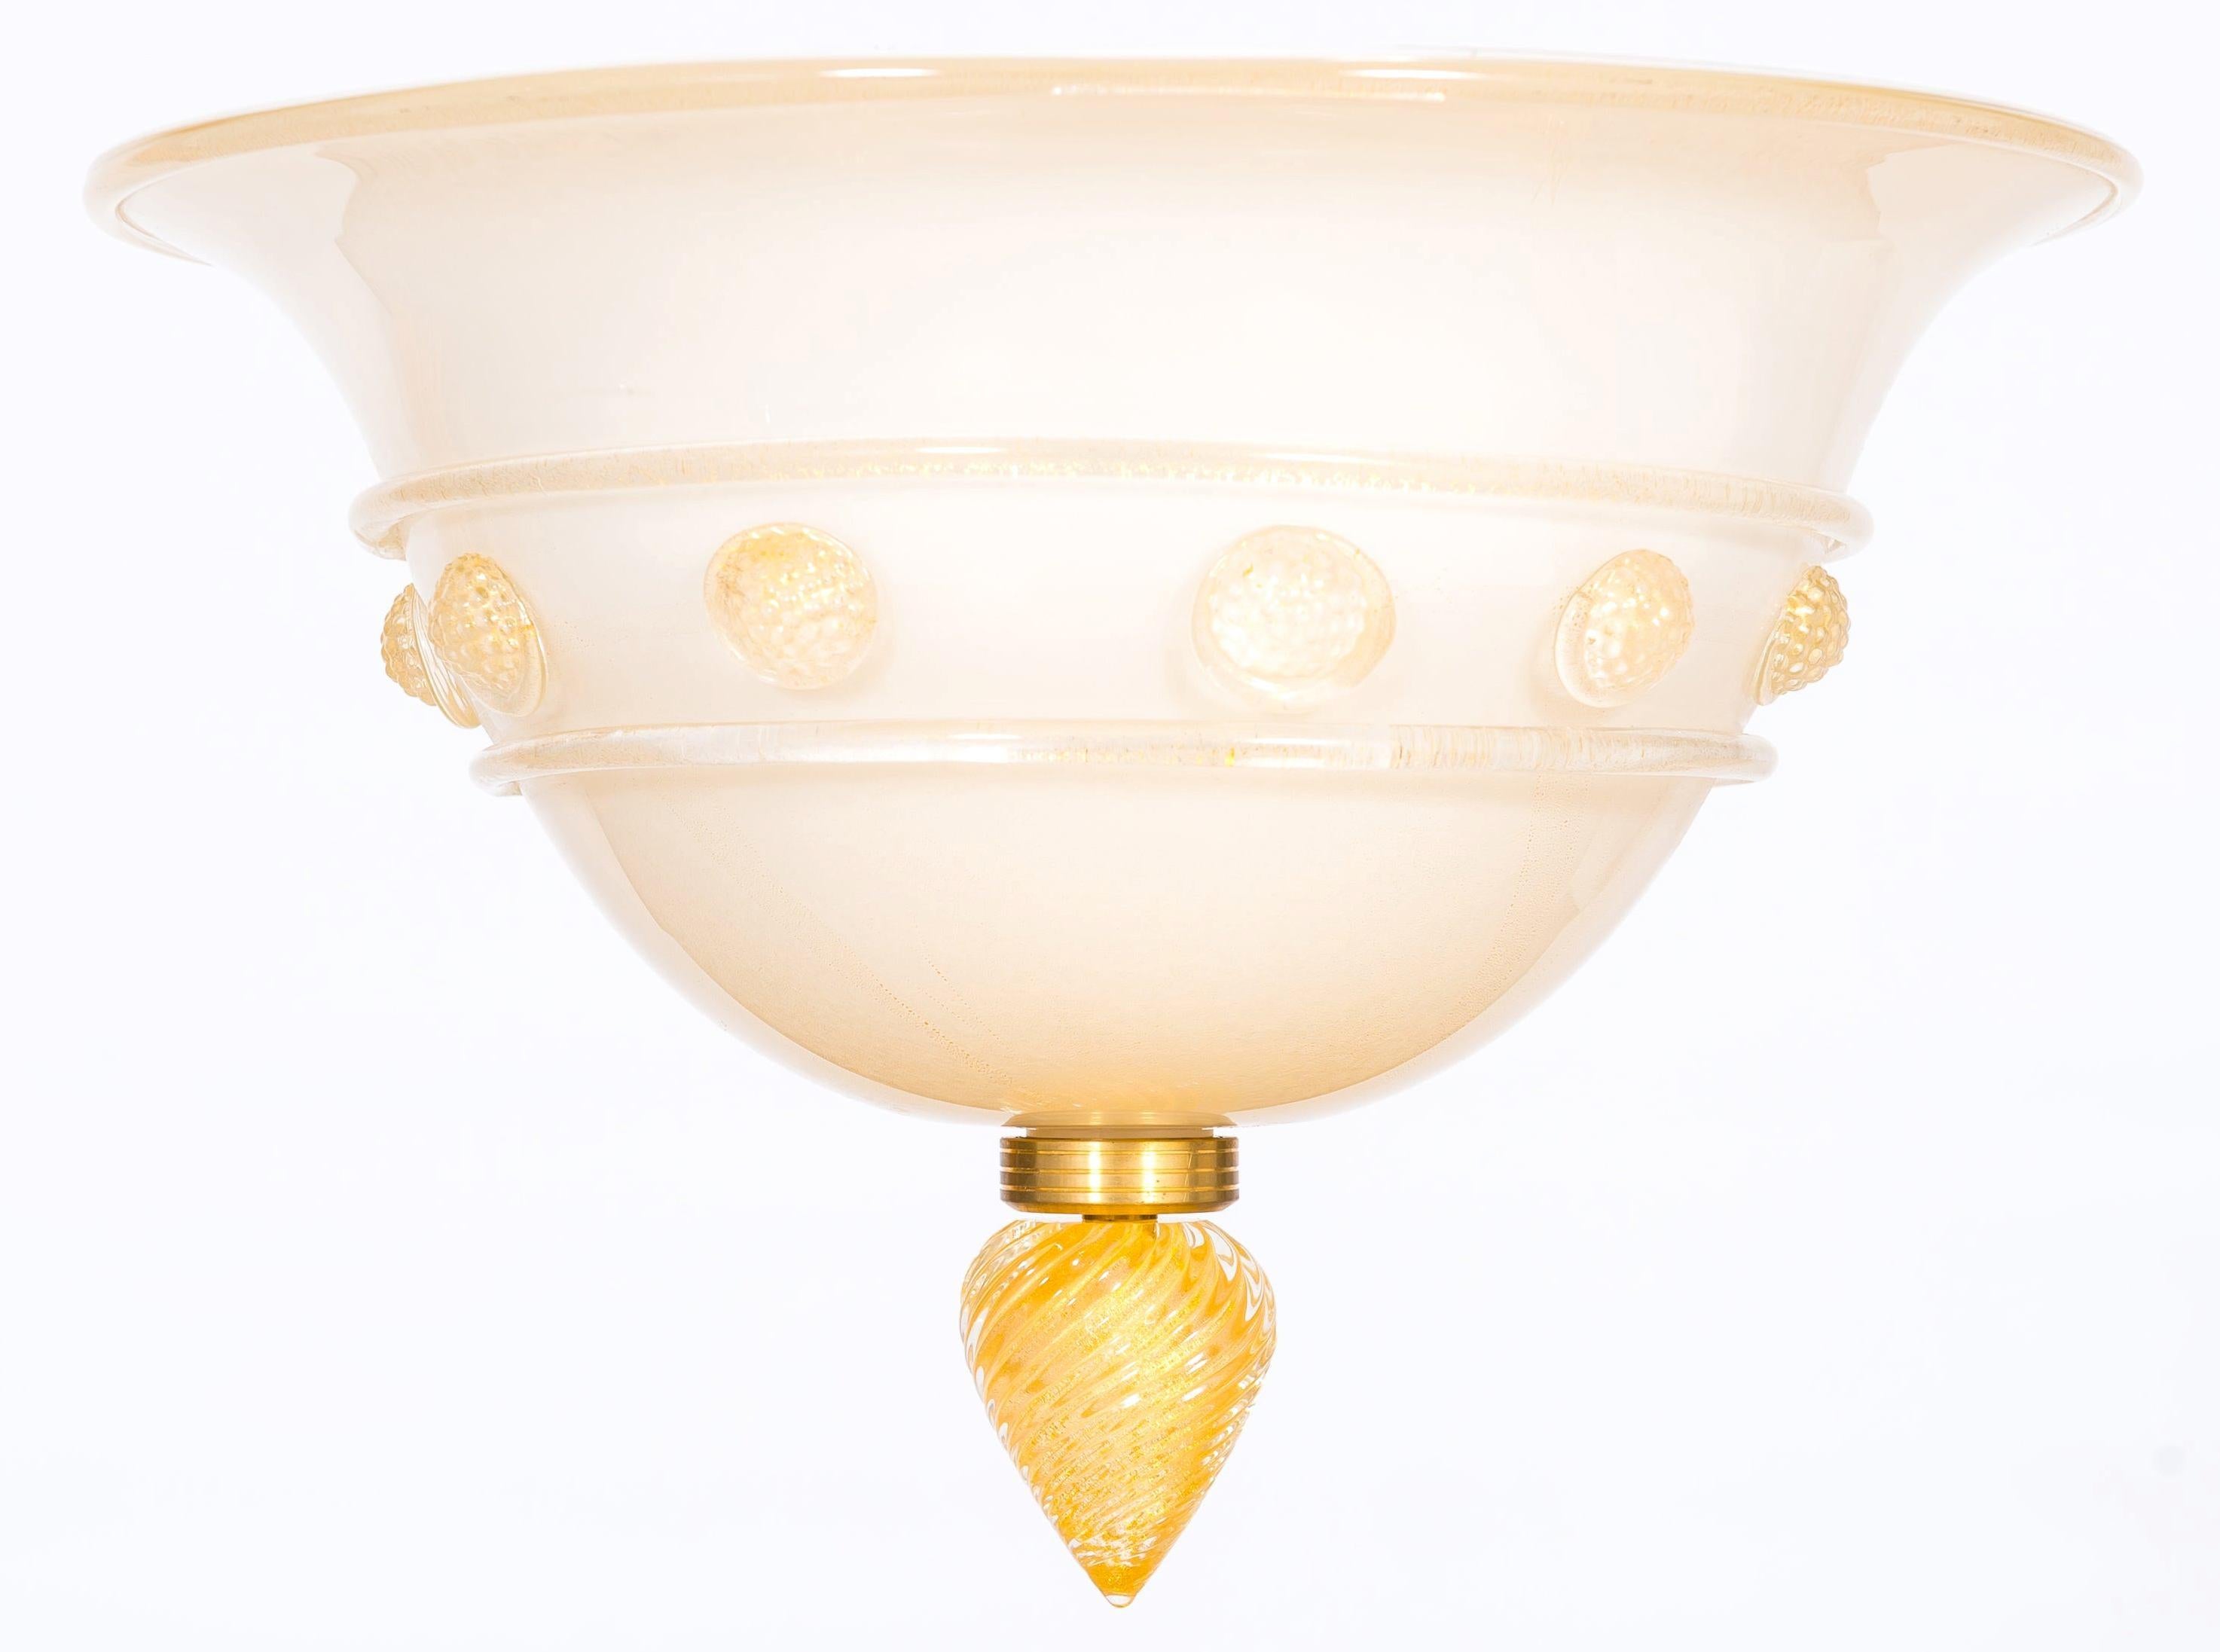 Murano glass flush mount ivory and gold color Decò, Italy.
This is a unique flush mount in Ivory and gold color, made up by a huge Murano glass bowl, with decorative elements in the middle of the main body, with ''morrise'' as the gold medals are